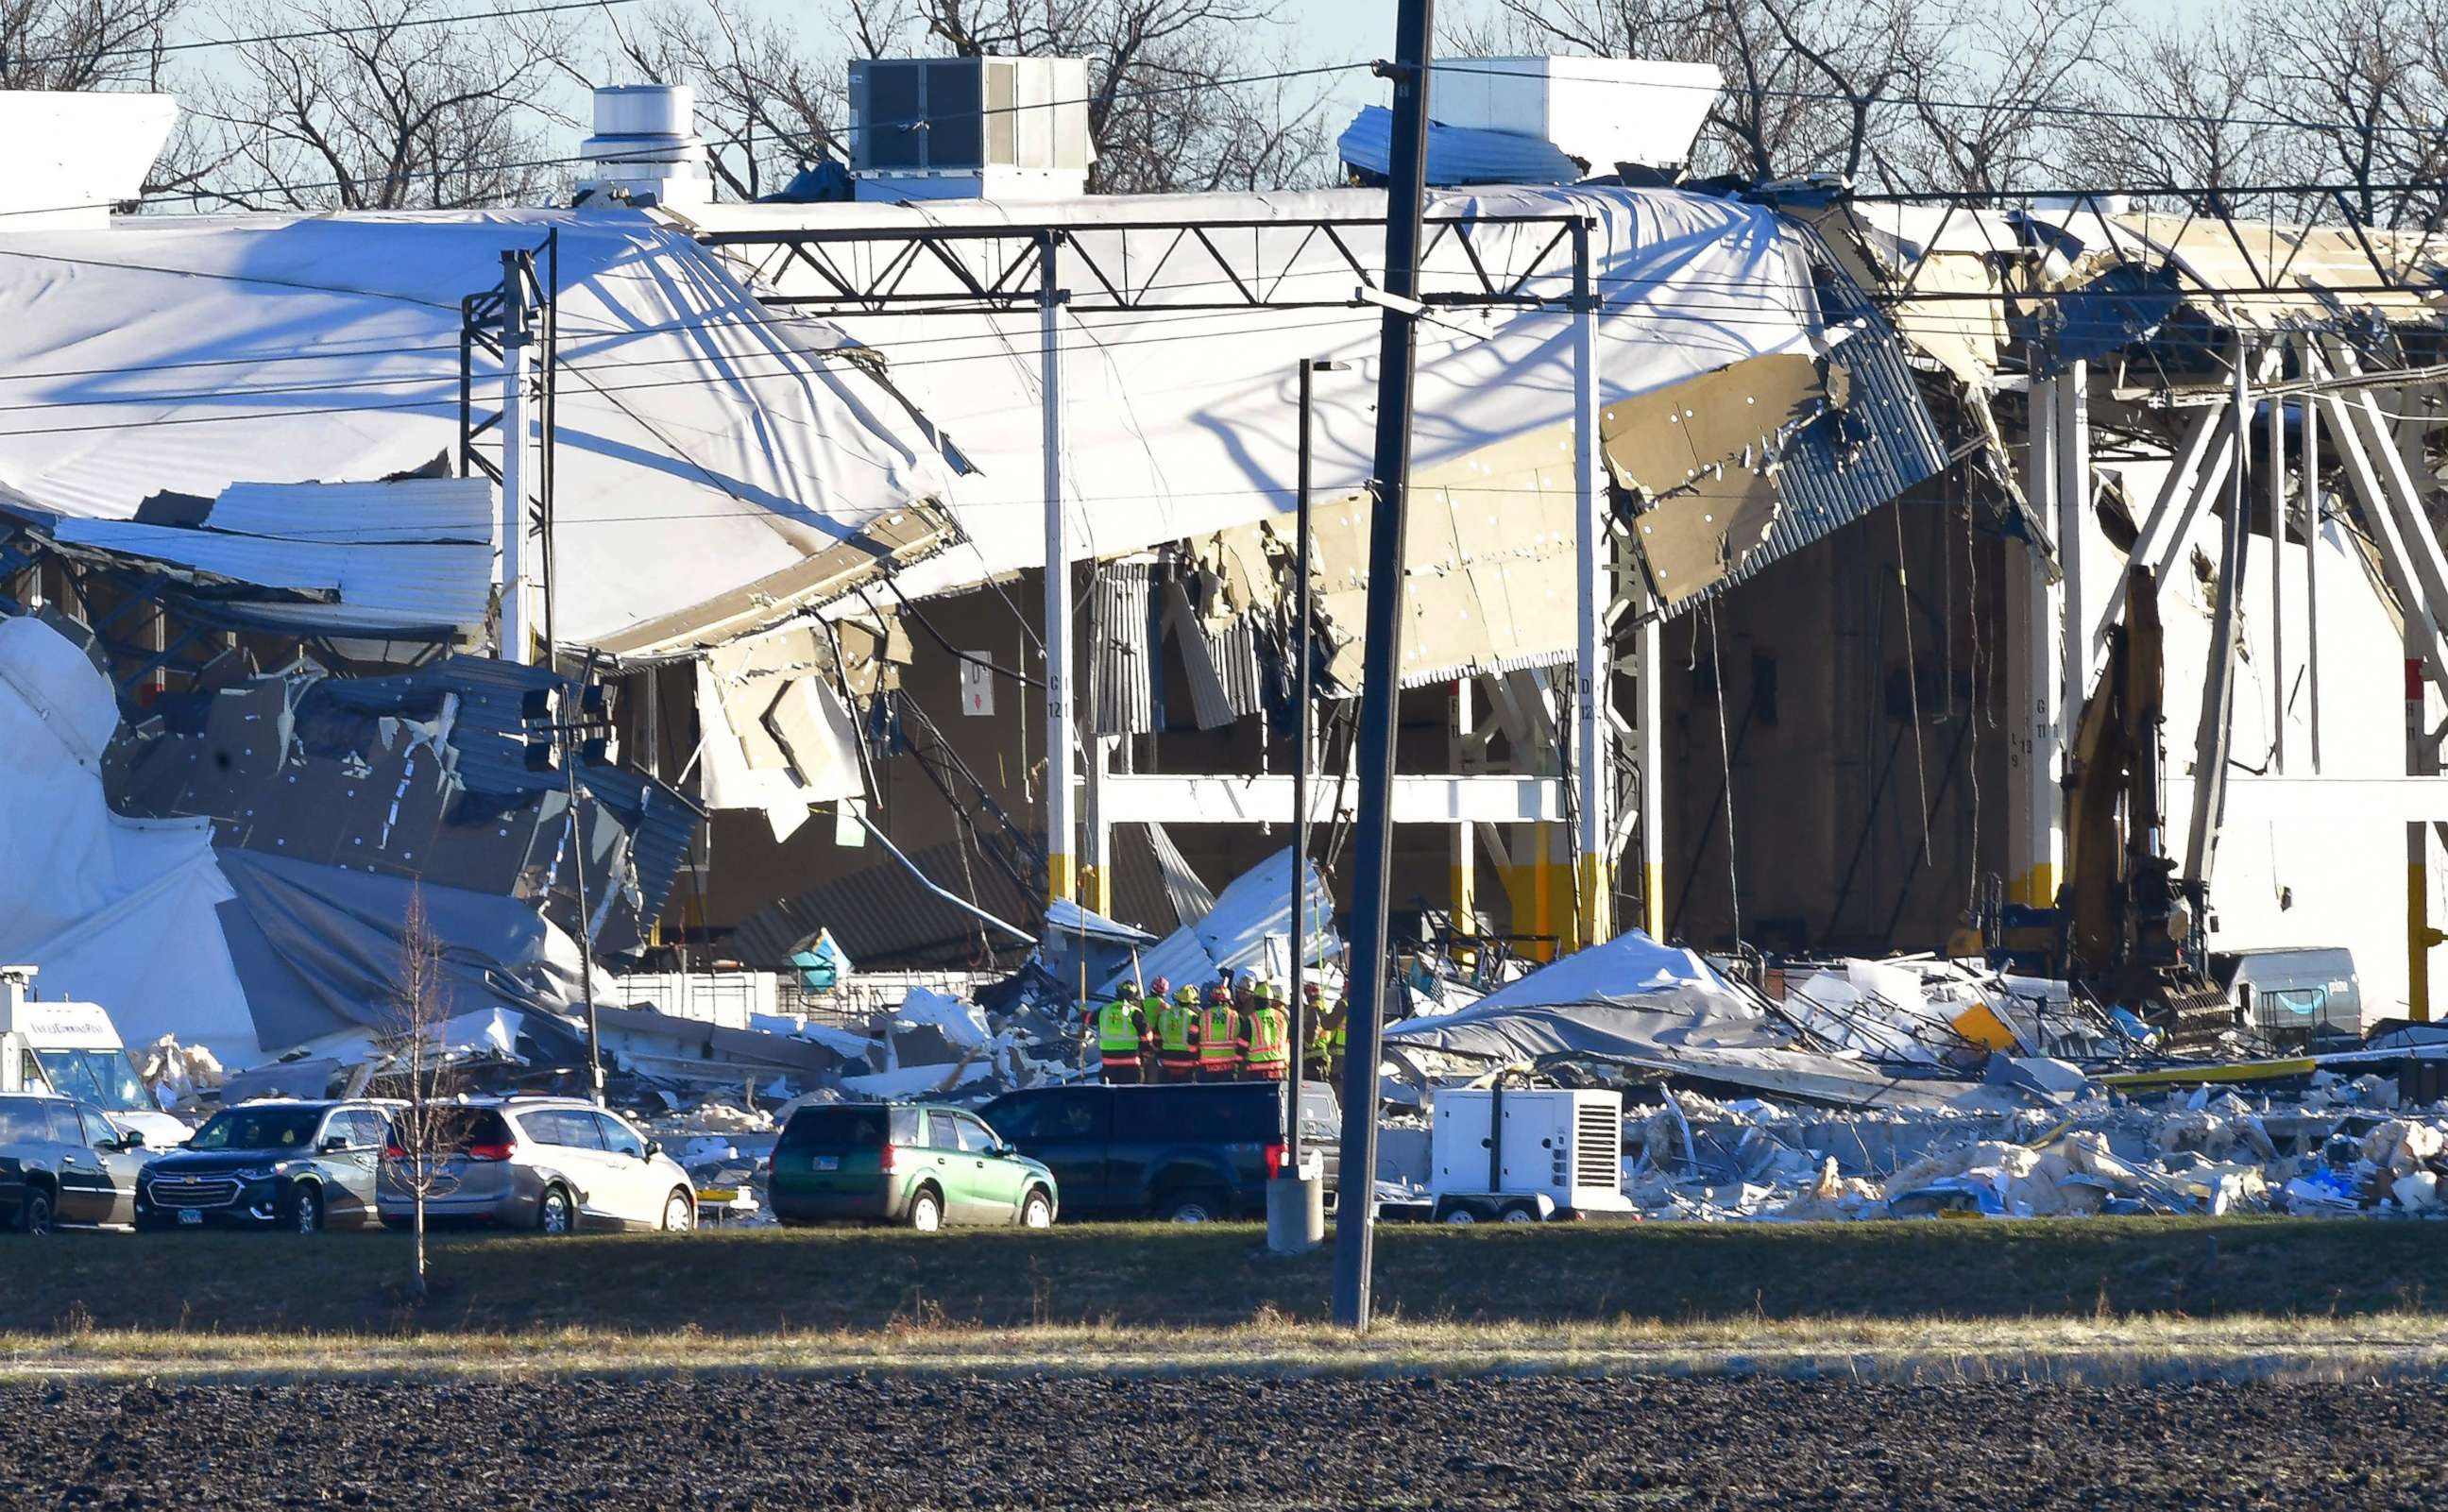 PHOTO: Recovery operations continue after the partial collapse of an Amazon Fulfillment Center in Edwardsville, Ill., Dec. 12, 2021